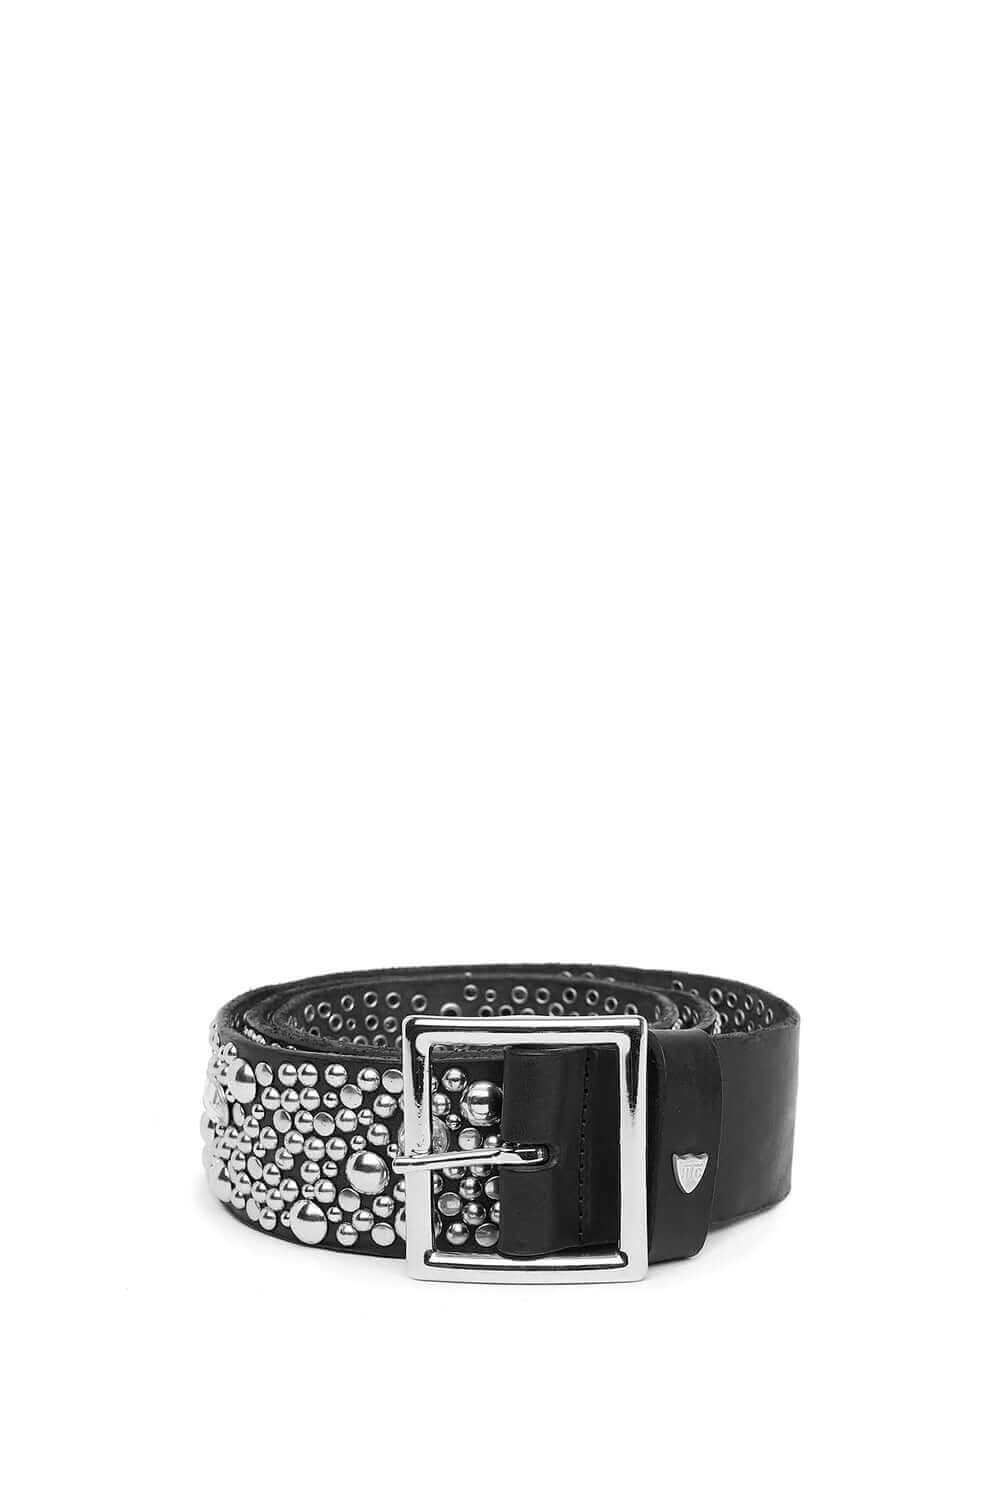 CHAOS BELT Leather belt with mixed studs, brass buckle, studded belt loop with HTC logo stud. Height: 4 cm HTC LOS ANGELES